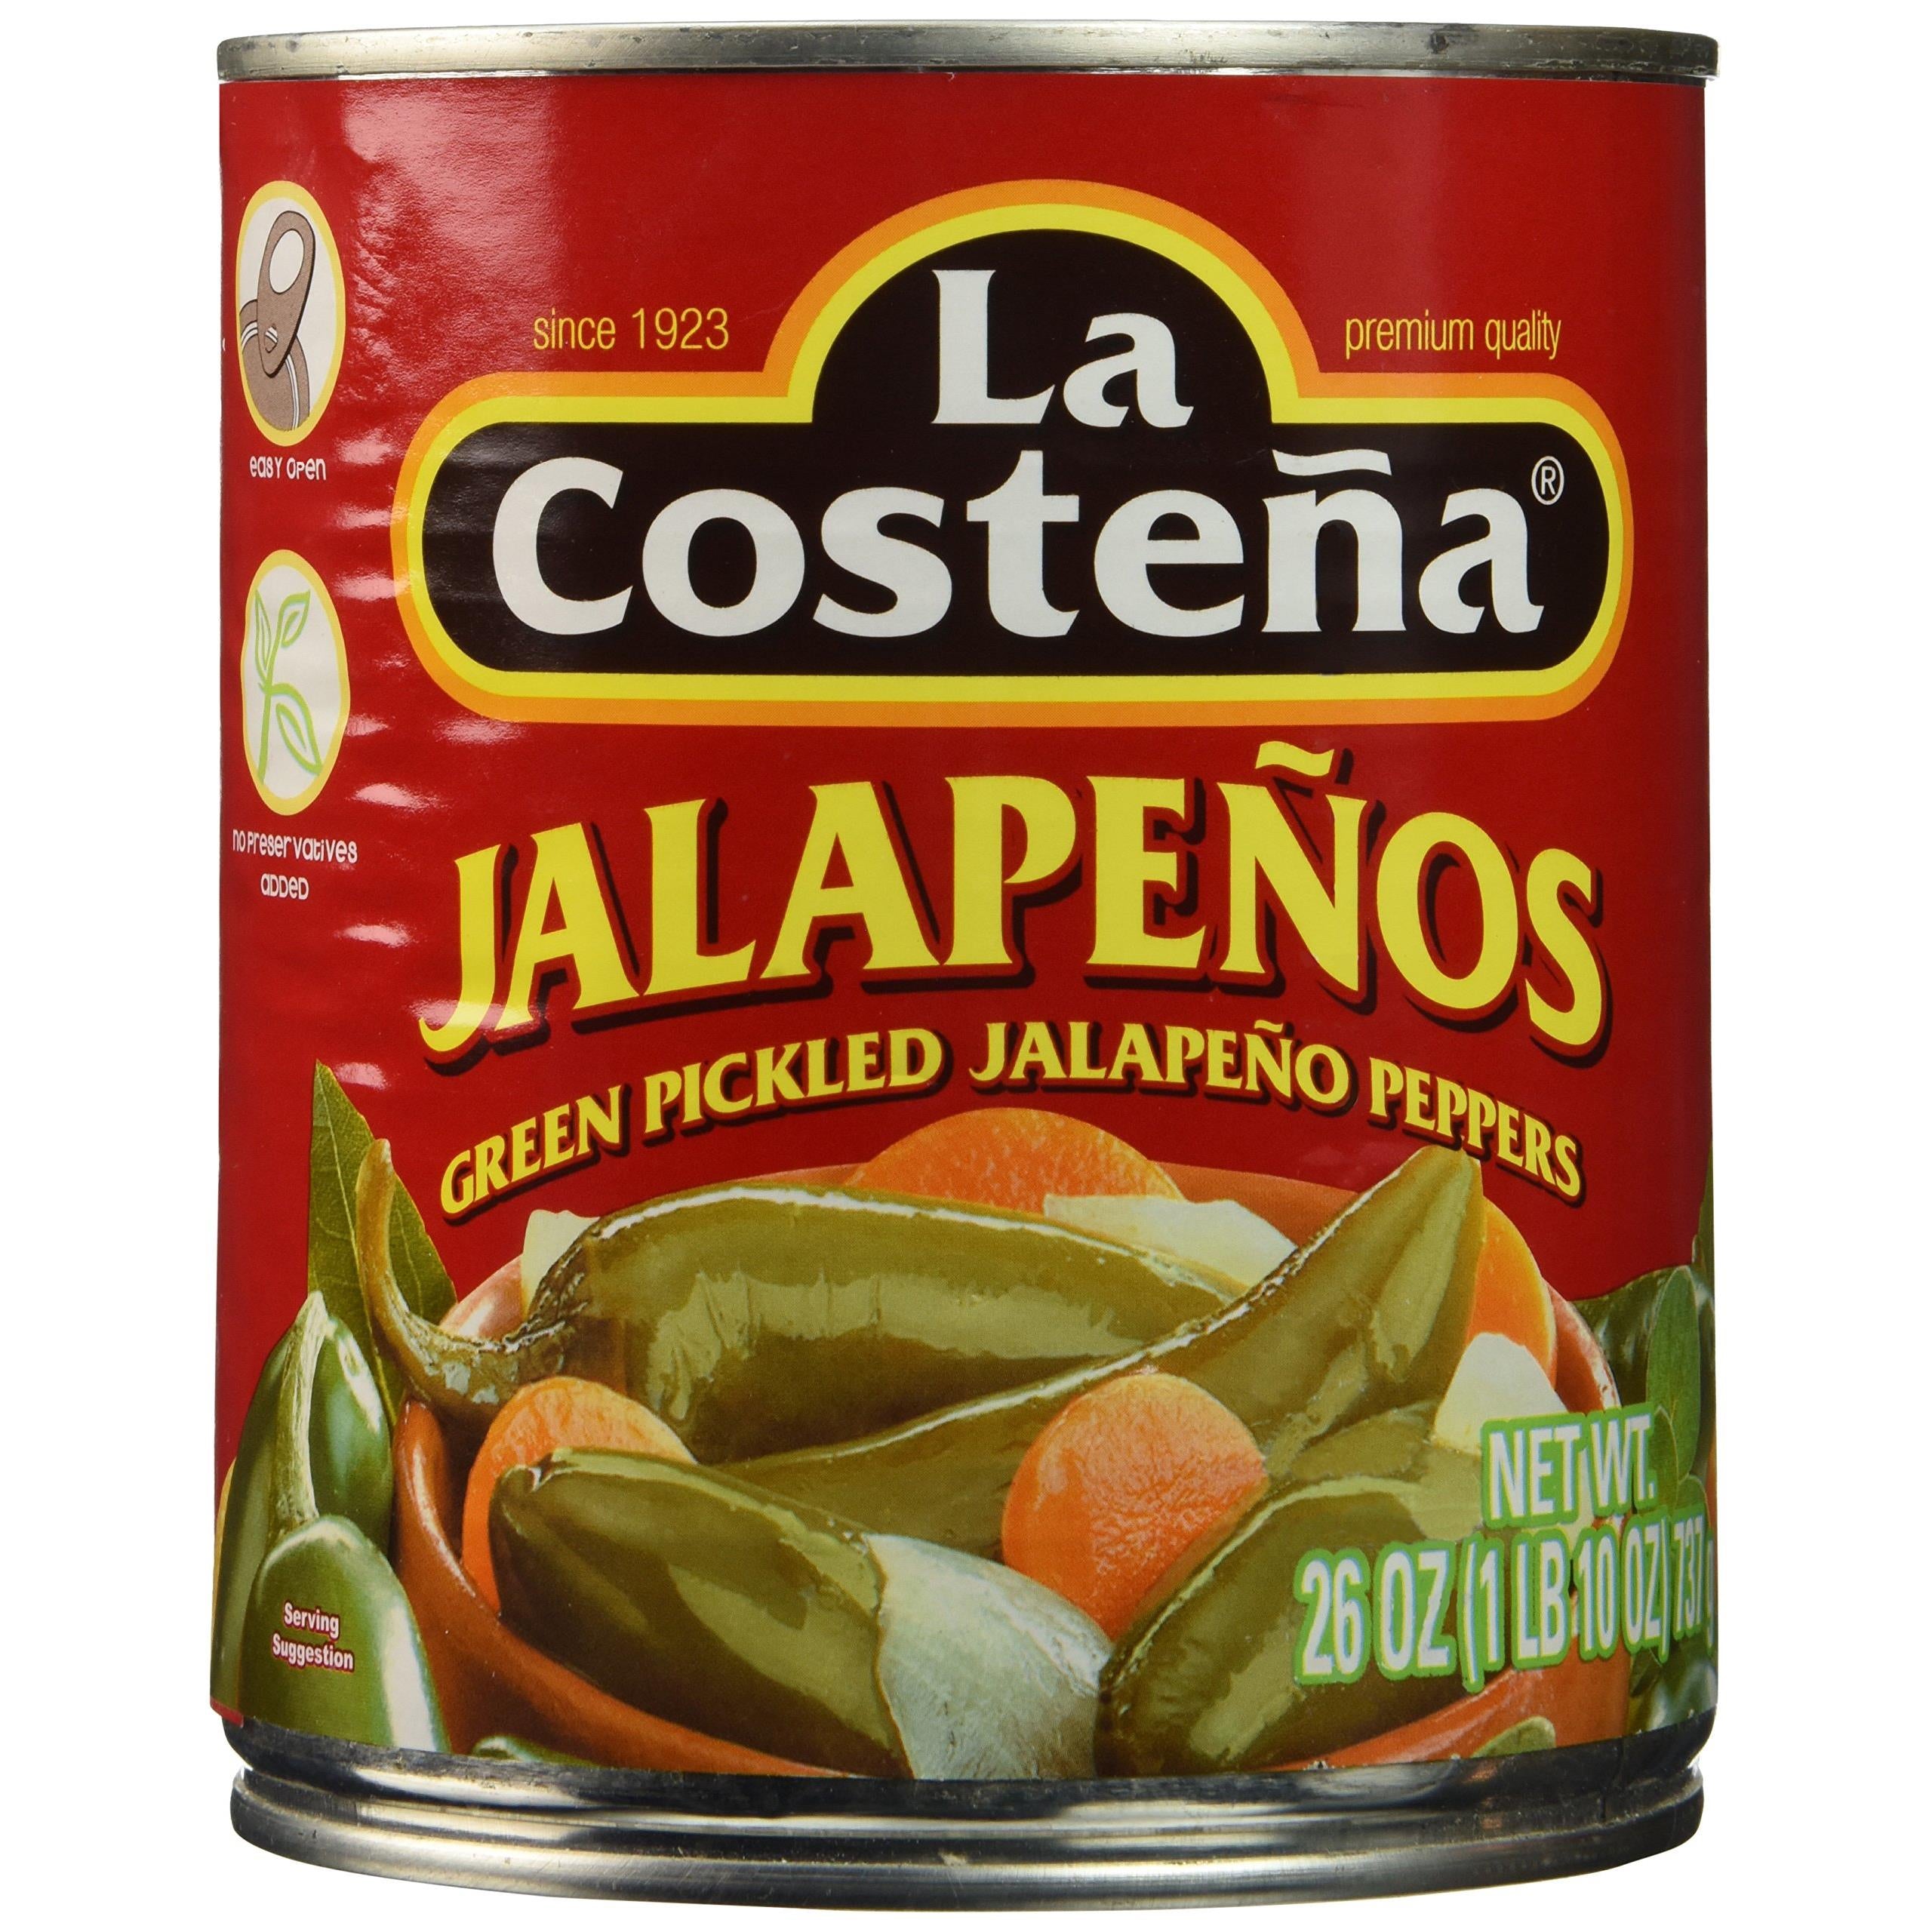 LA COSTENA Whole Jalapeno Pepper, 26 Ounce - Pack of 3